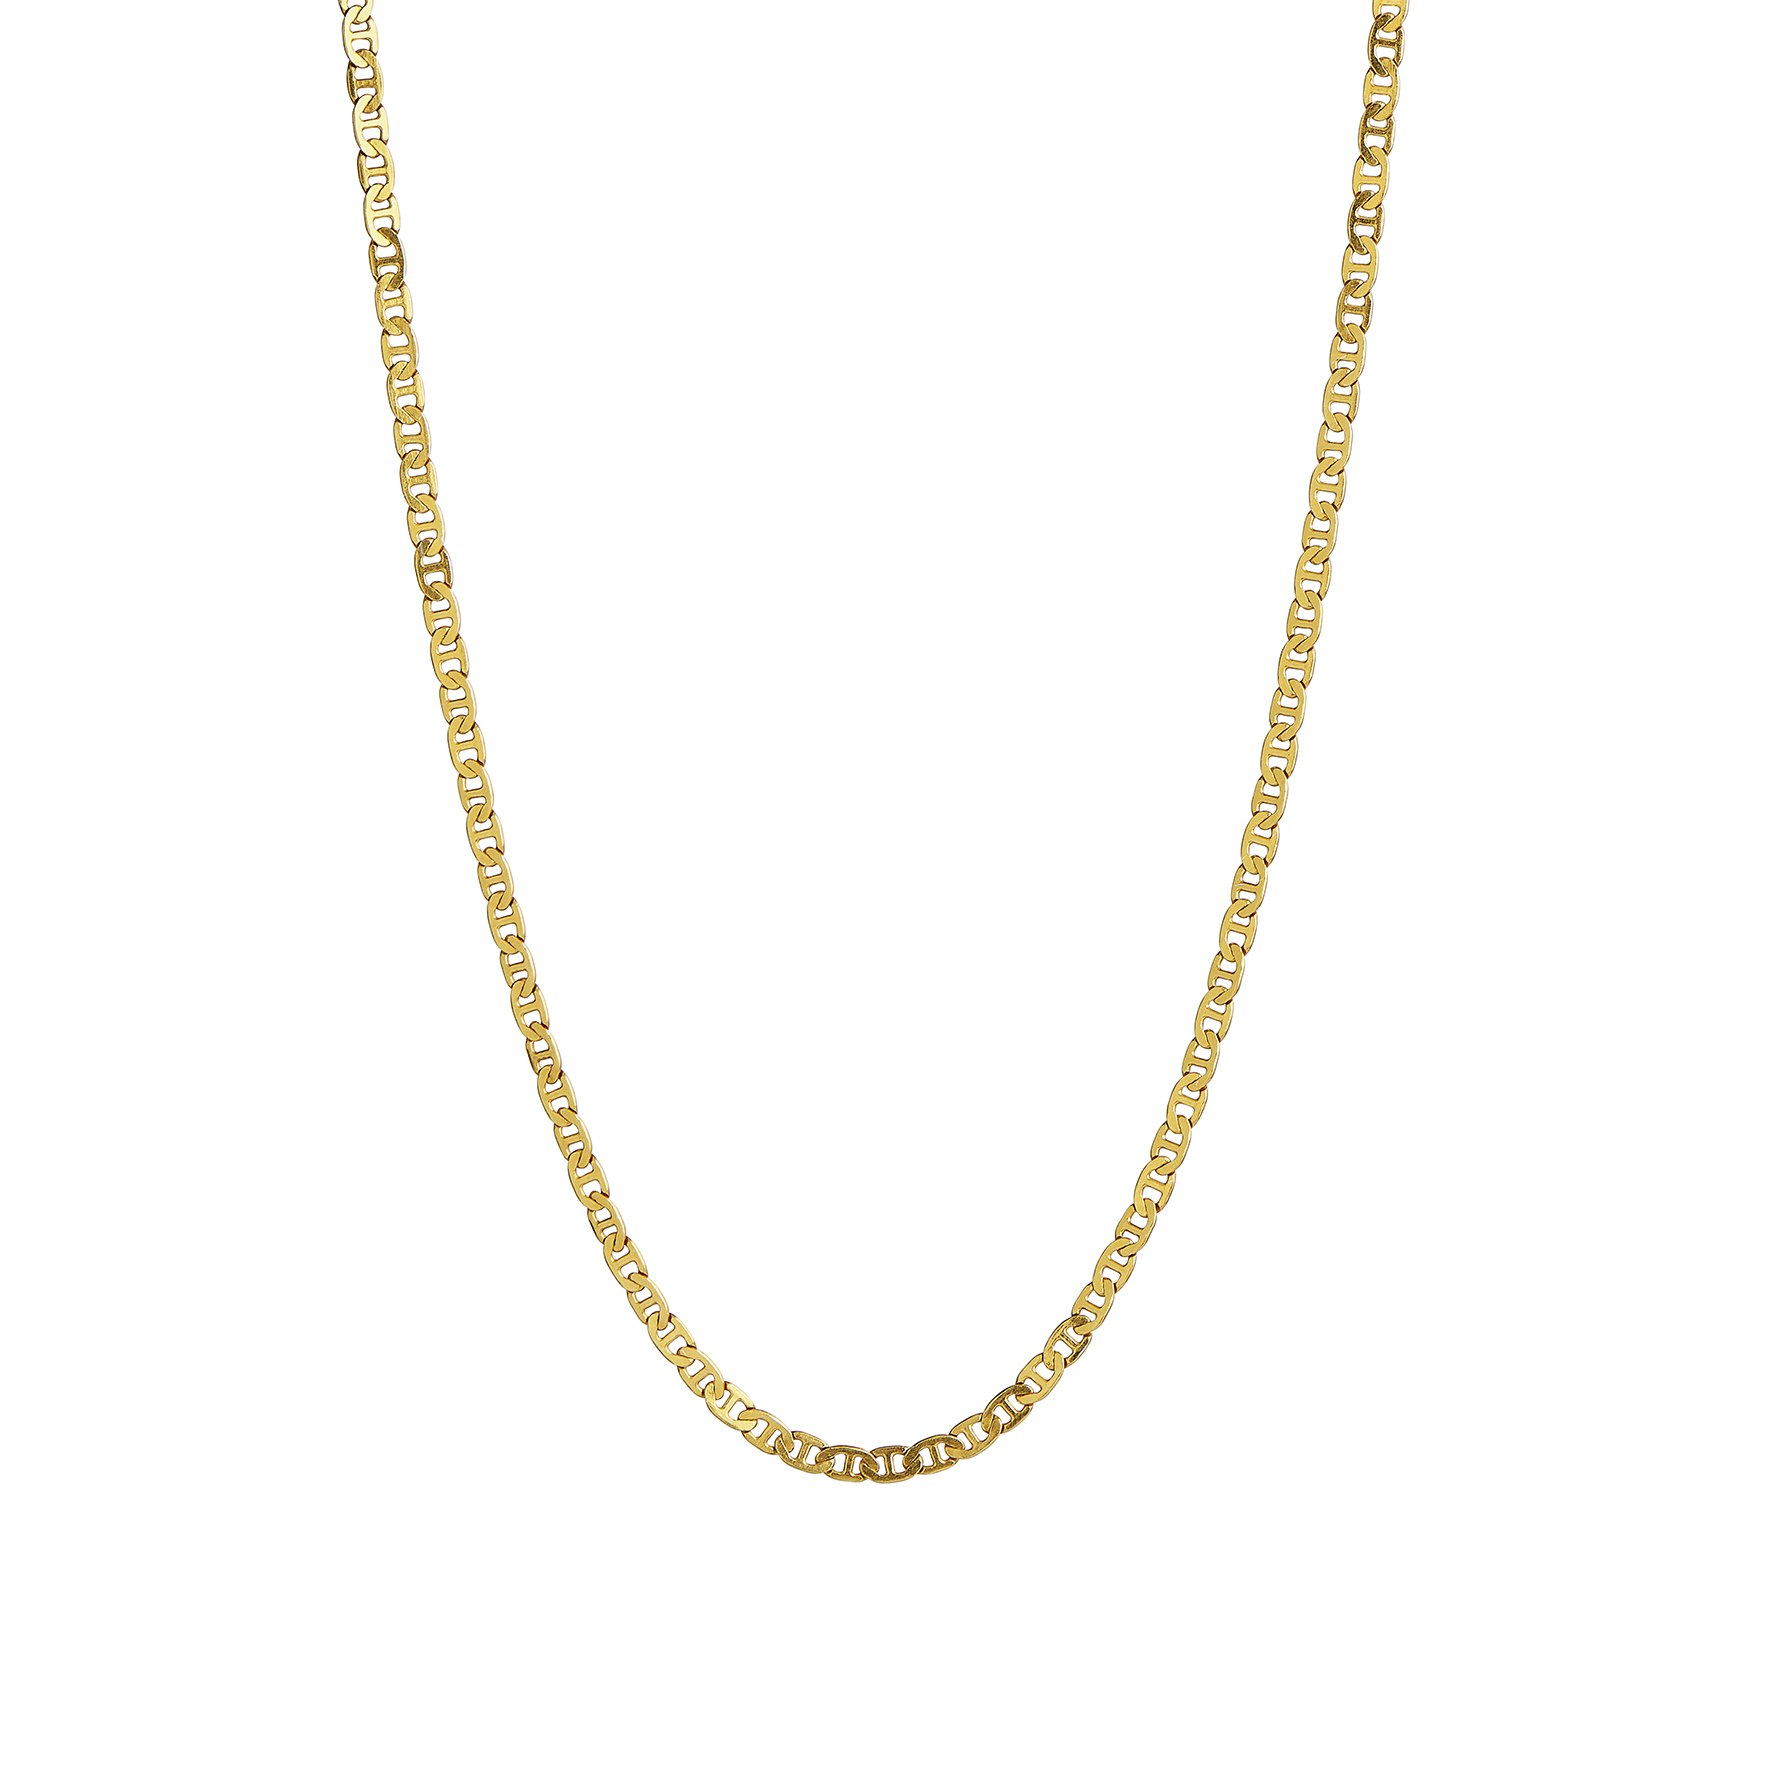 Petit Link Pendant Chain from STINE A Jewelry in Goldplated Silver Sterling 925